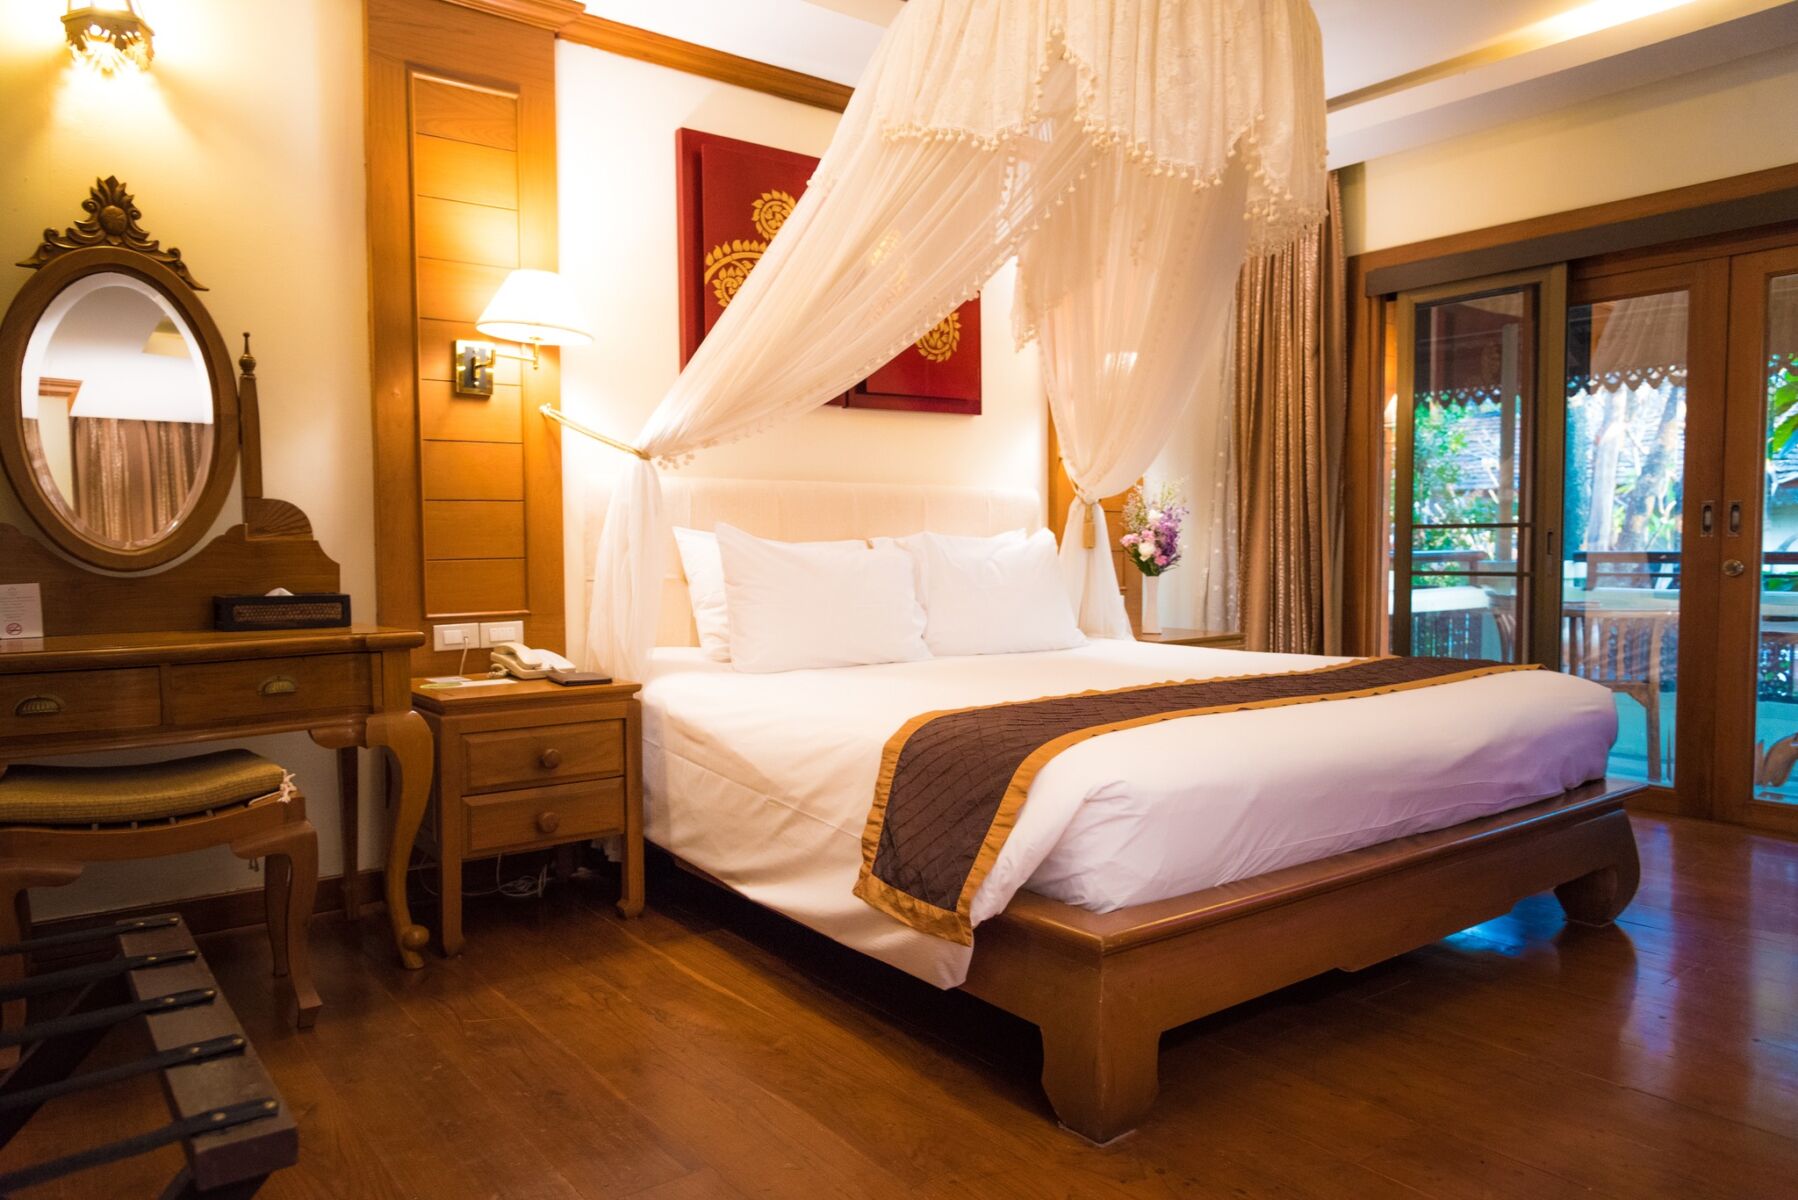 City Guide: Top 5 hotels for families in Chiang Mai 2023